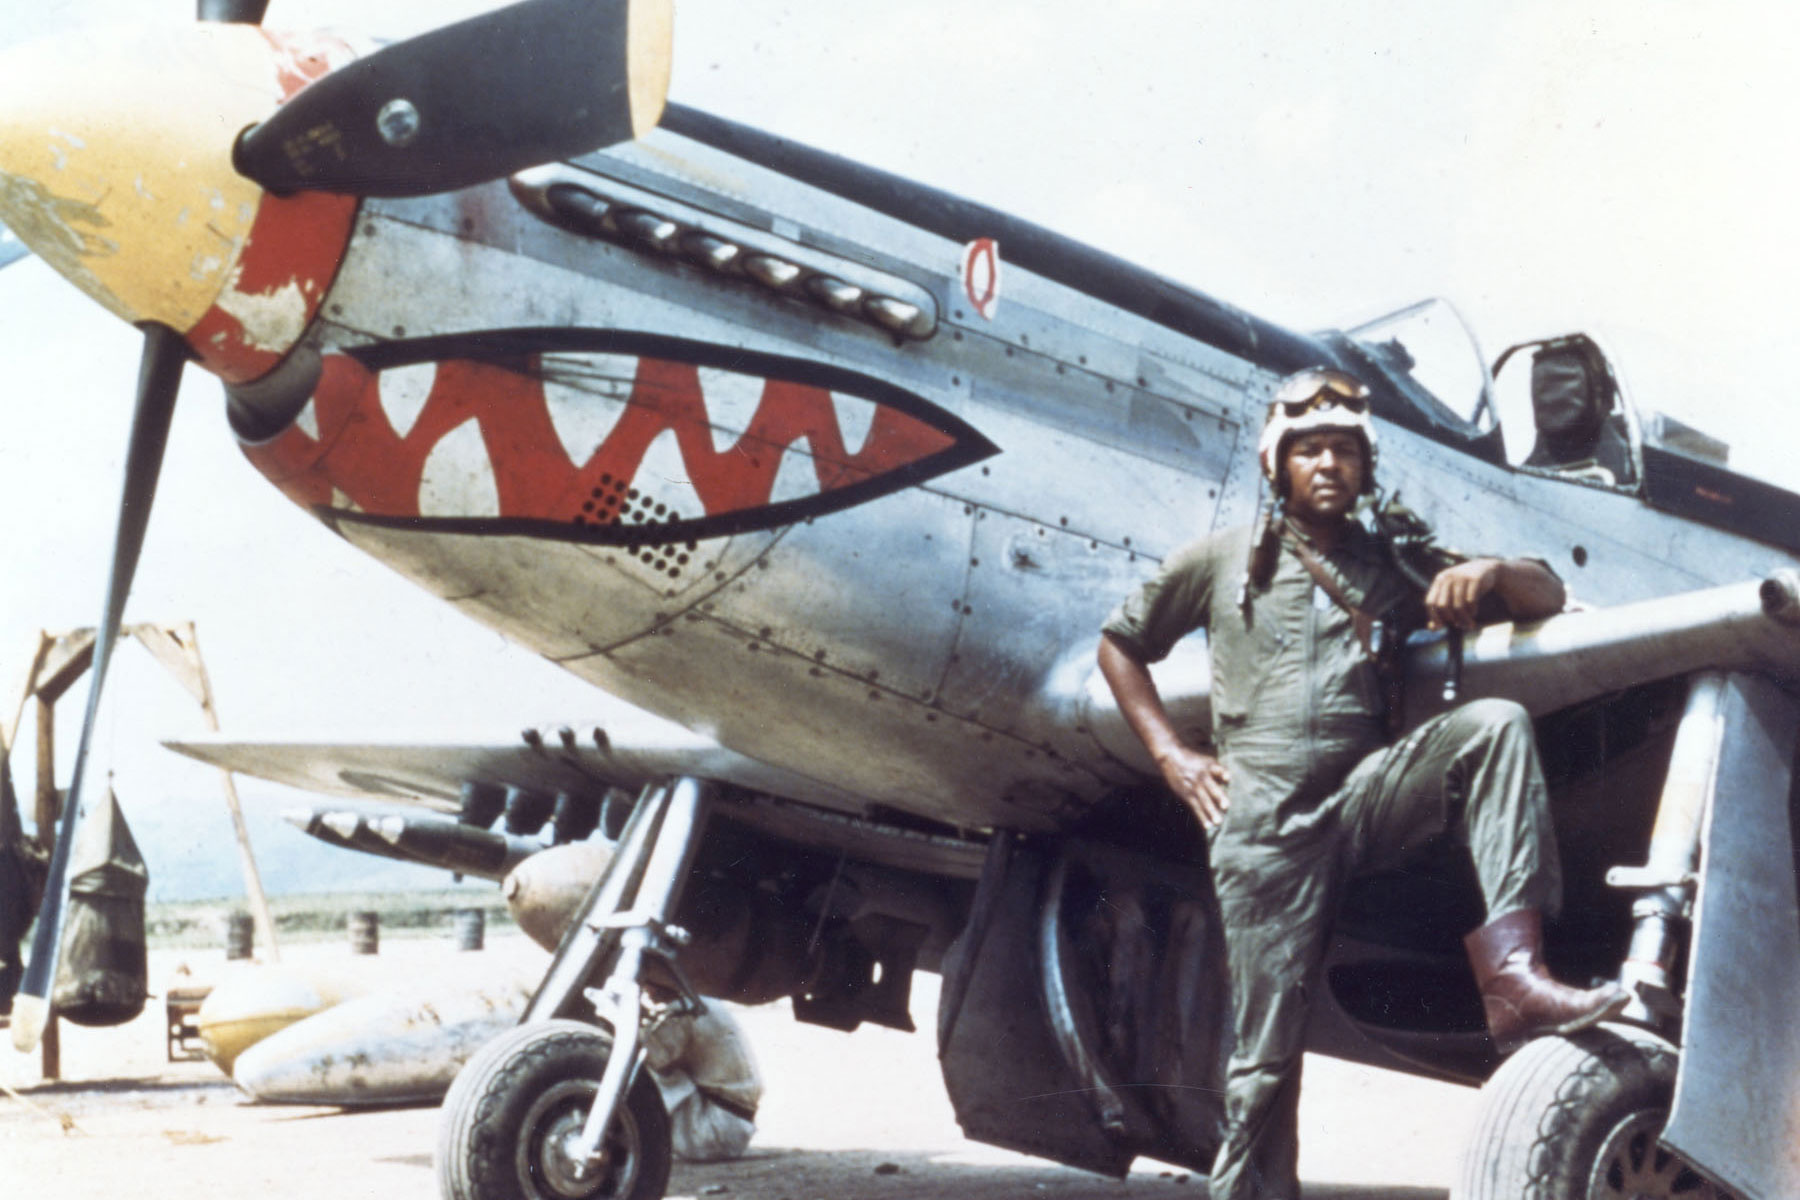 Daniel "Chappie" James Jr., pictured here serving as a fighter pilot with a P-51 during the Korea.War, in 1975 because the first African American to reach the rank of four-star general and died shortly after his retirement in 1978.  His son, Daniel James III, also served in the Air Force and Air National Guard rising to the rank of lieutenant general, and becoming the first African-American to take command as director of the Air National Guard before retiring in 2006.  (U.S. Air Force)